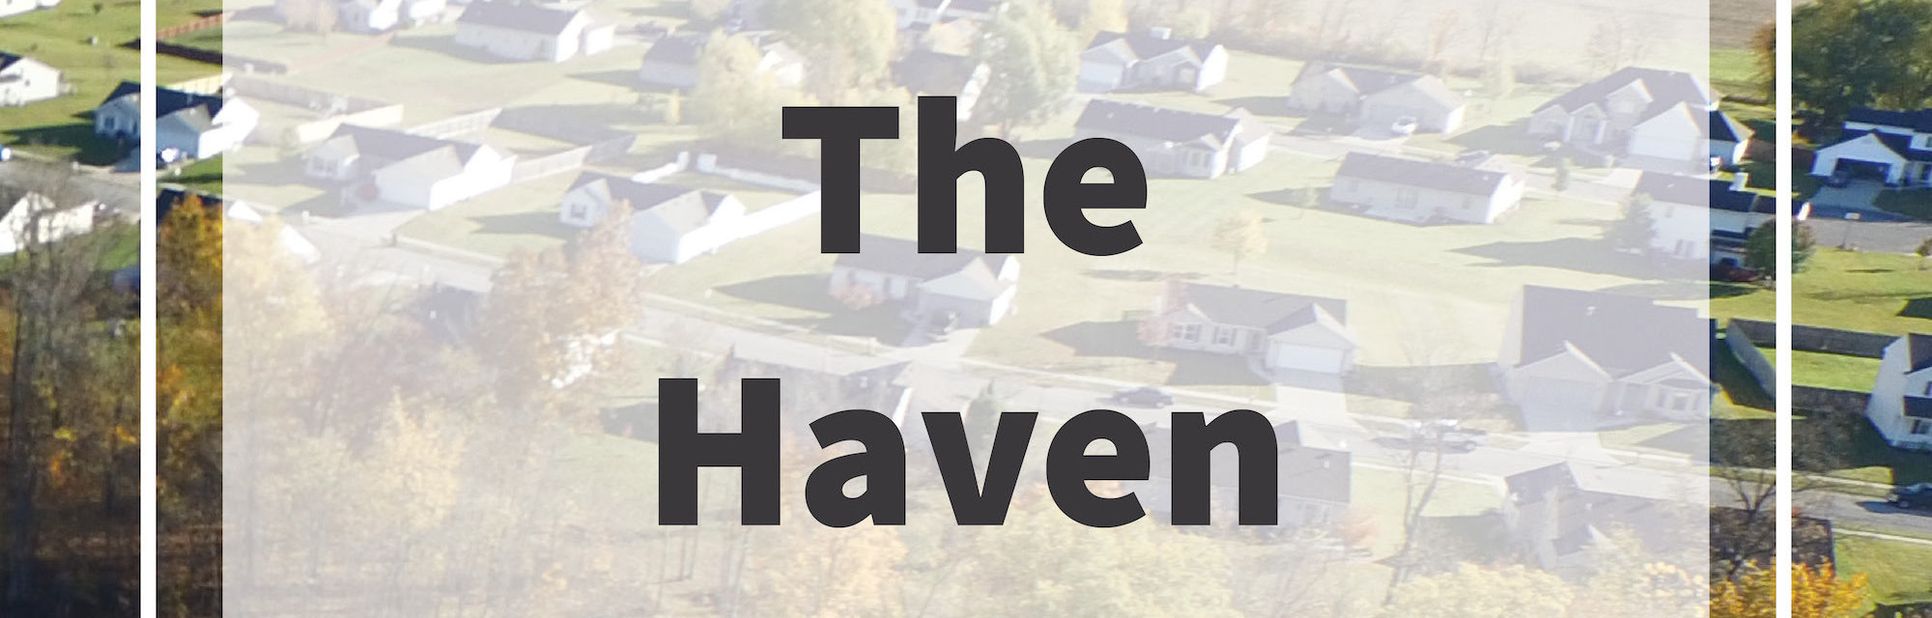 The Haven,46804